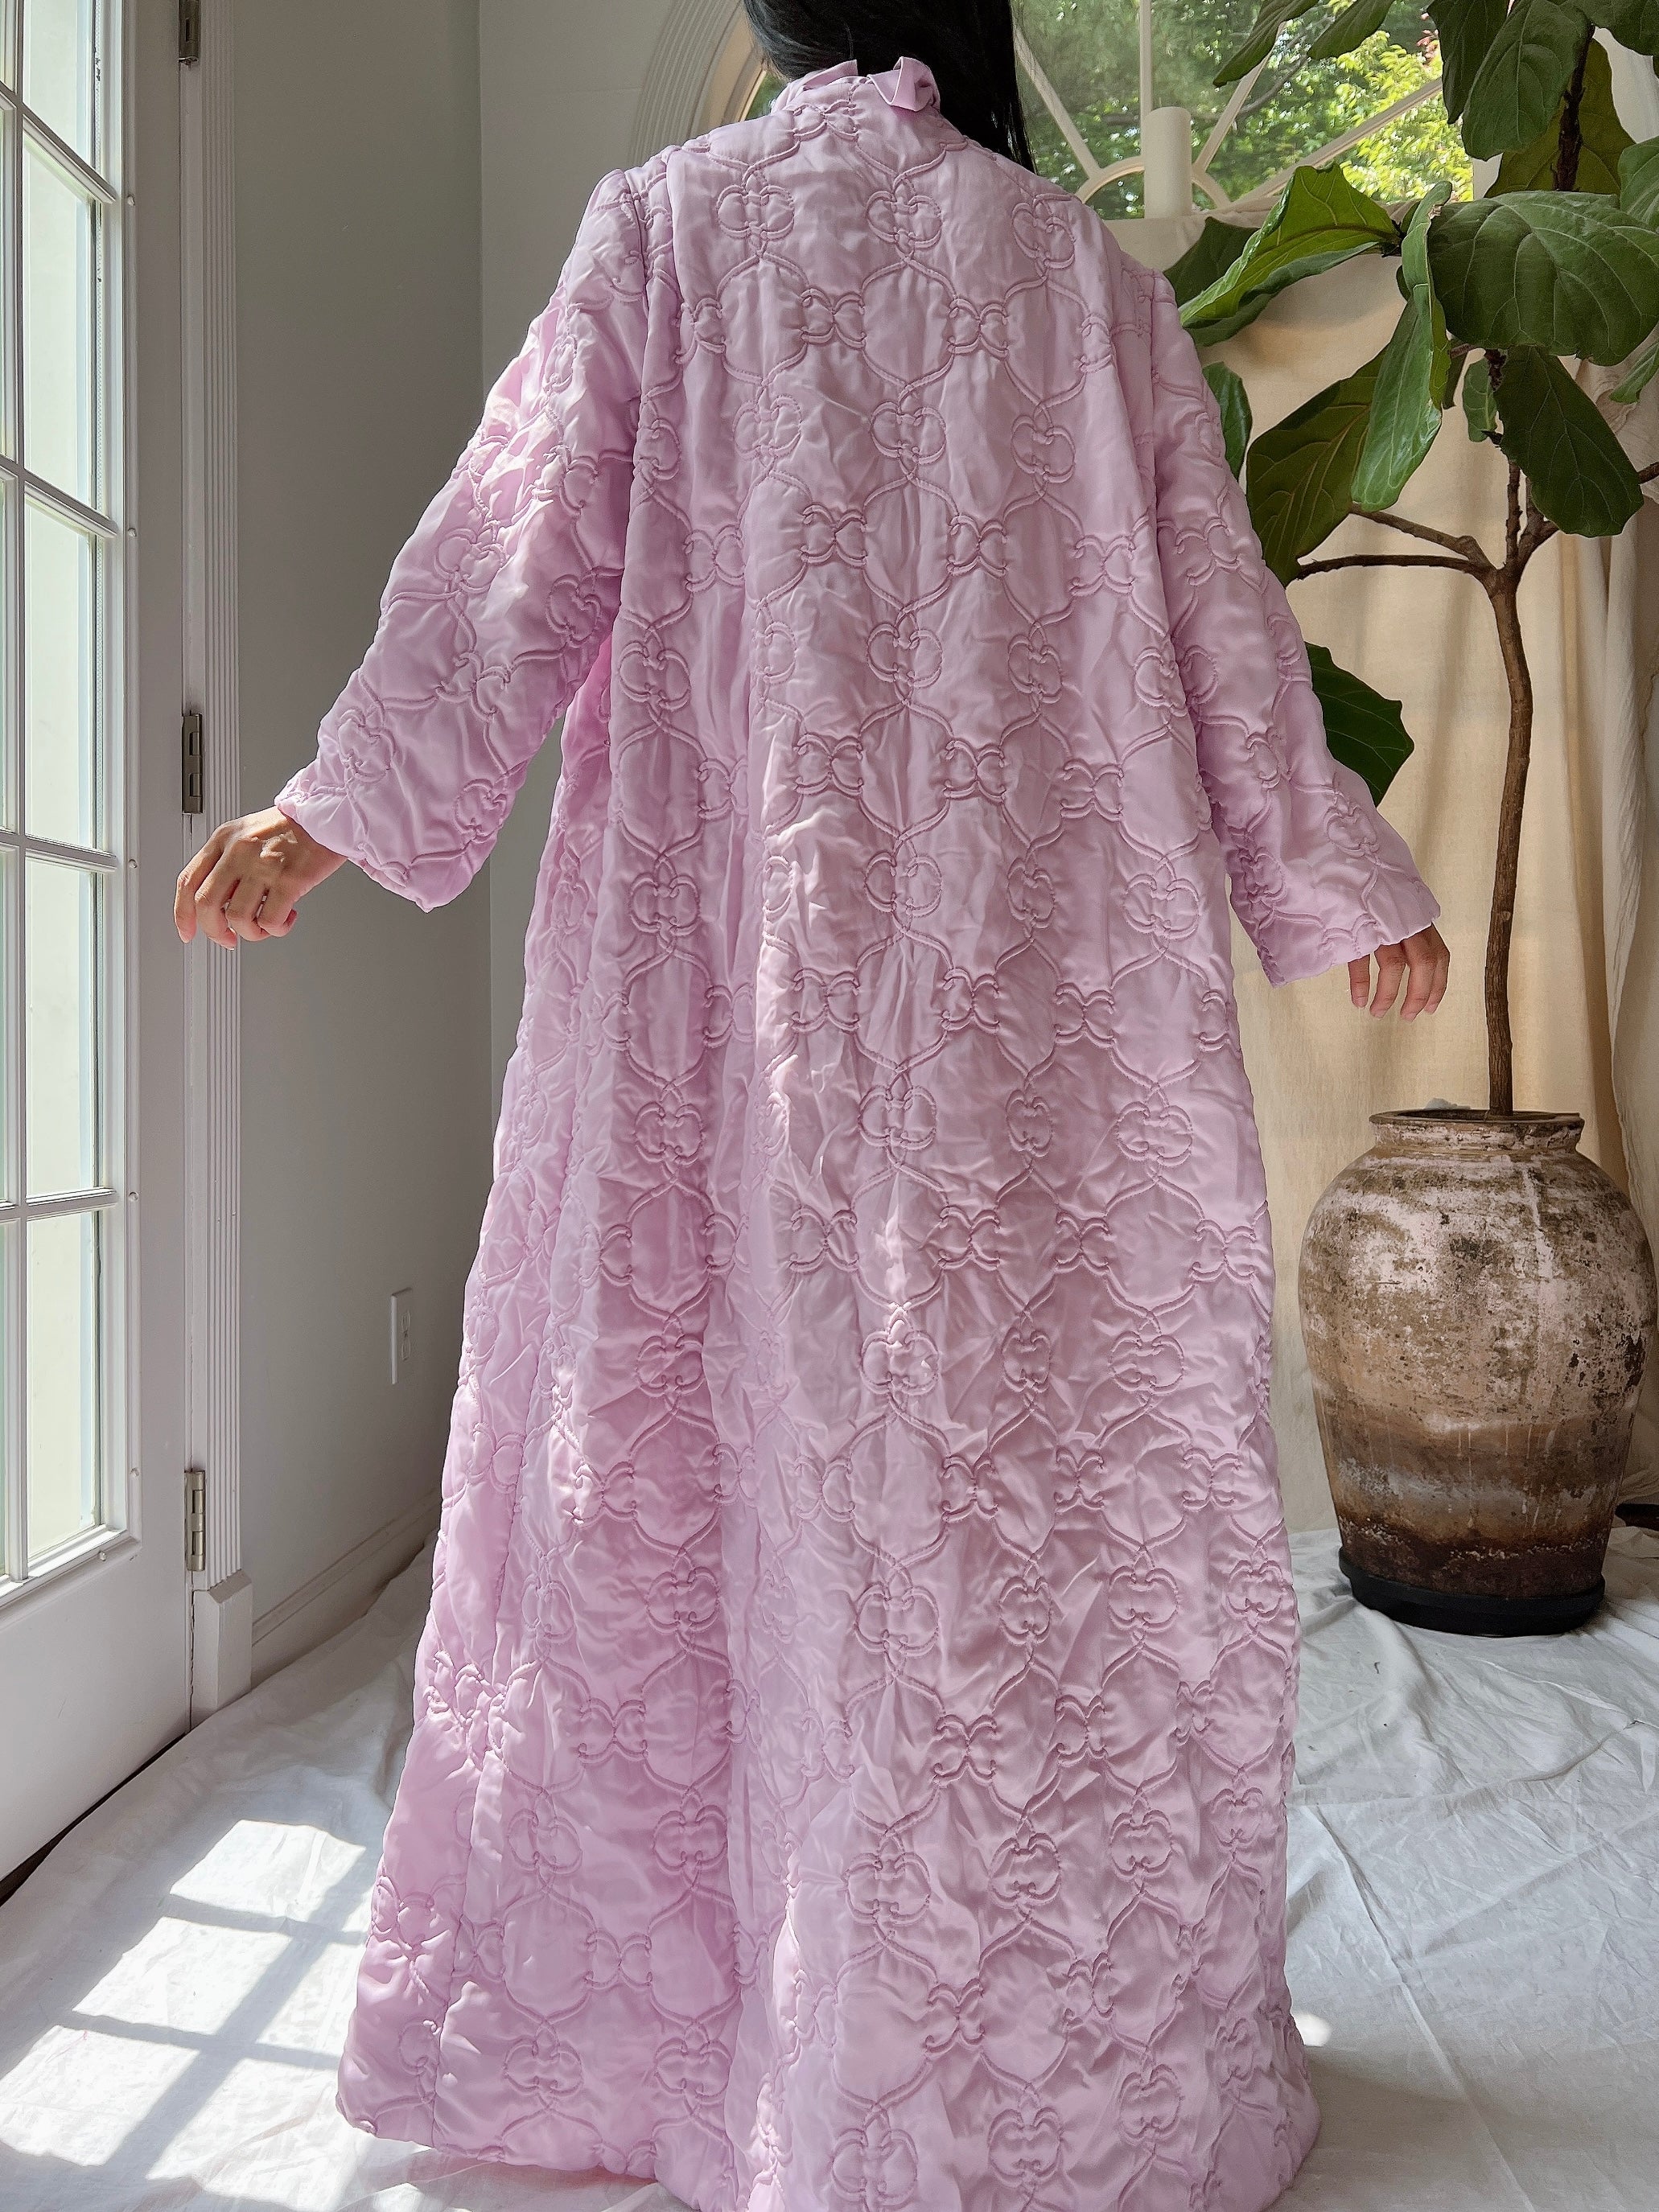 1960s Lilac Quilted Duster - OSFM